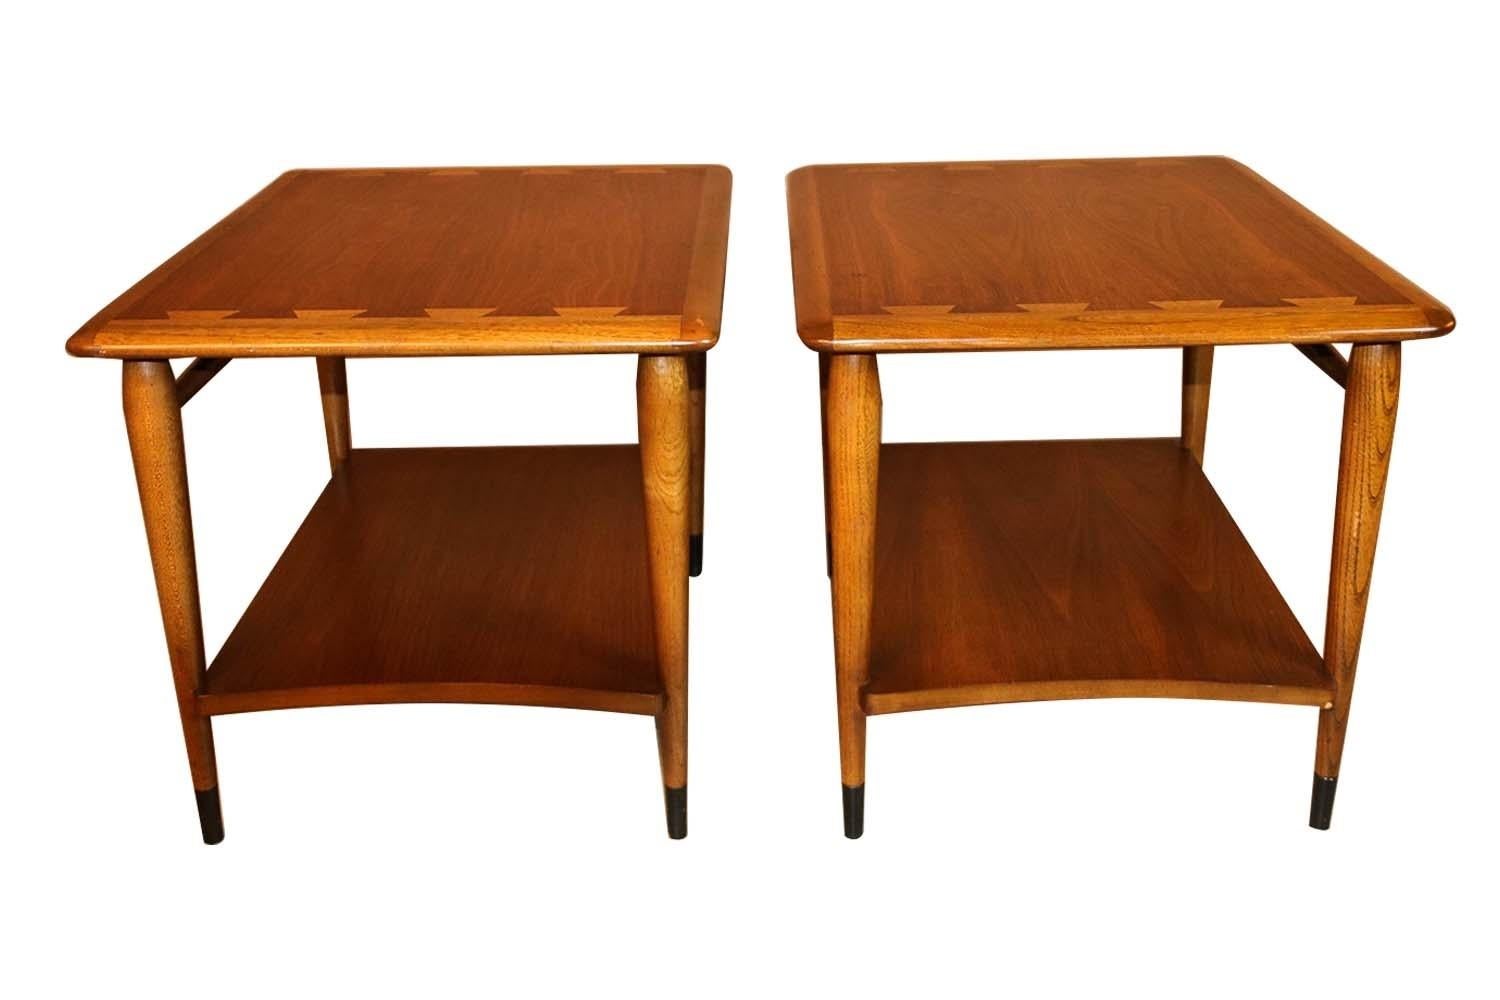 A beautiful pair of end tables by Lane Furniture Co. from the Lane ‘Acclaim’ collection, designed by Andre Bus. Remains in good condition throughout. Featuring stunning, signature dovetailed design, in a vivid contrast against the surface with